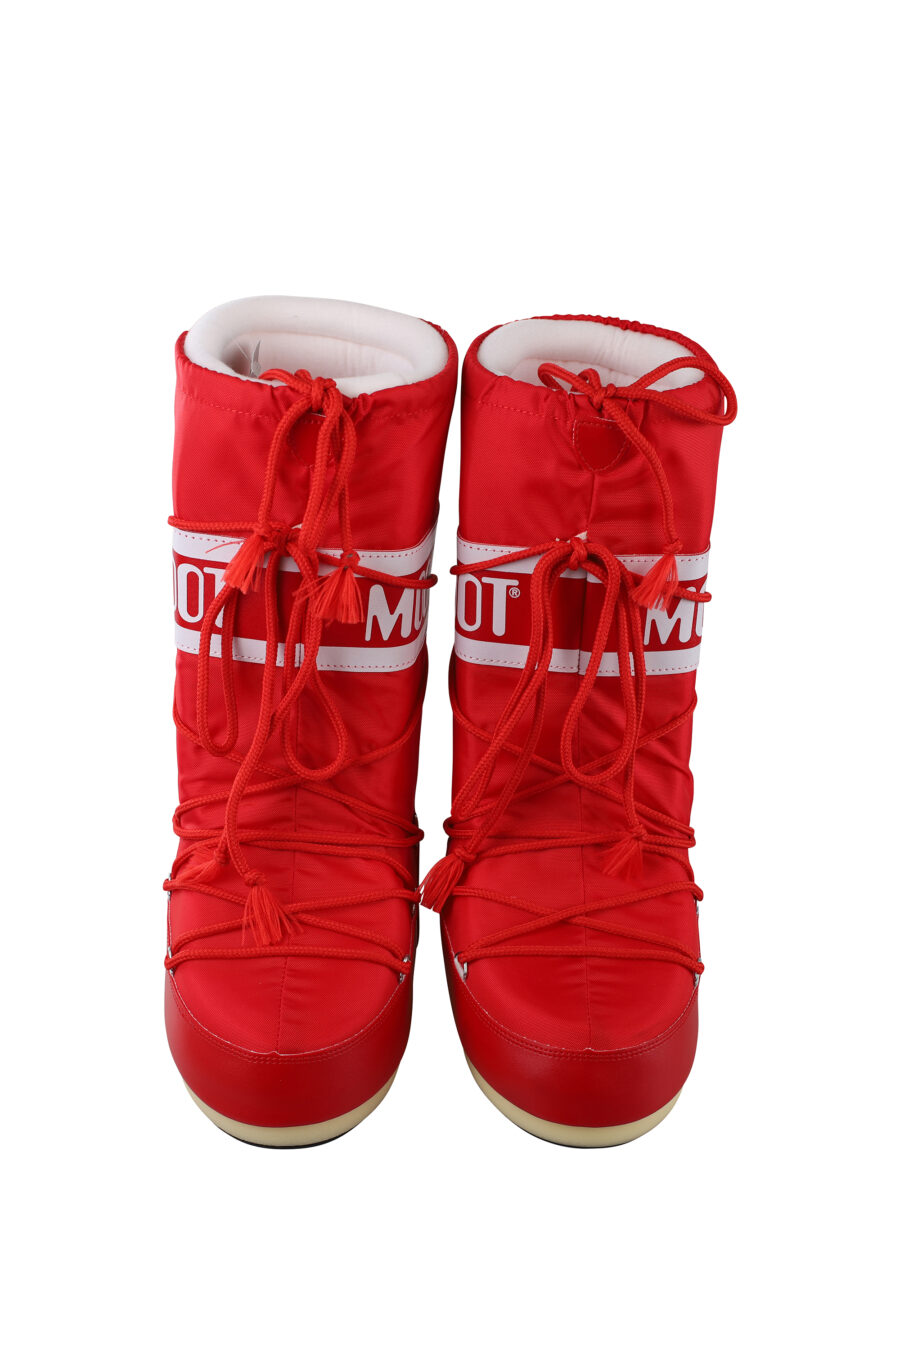 Red snow boots with white logo - IMG 6702